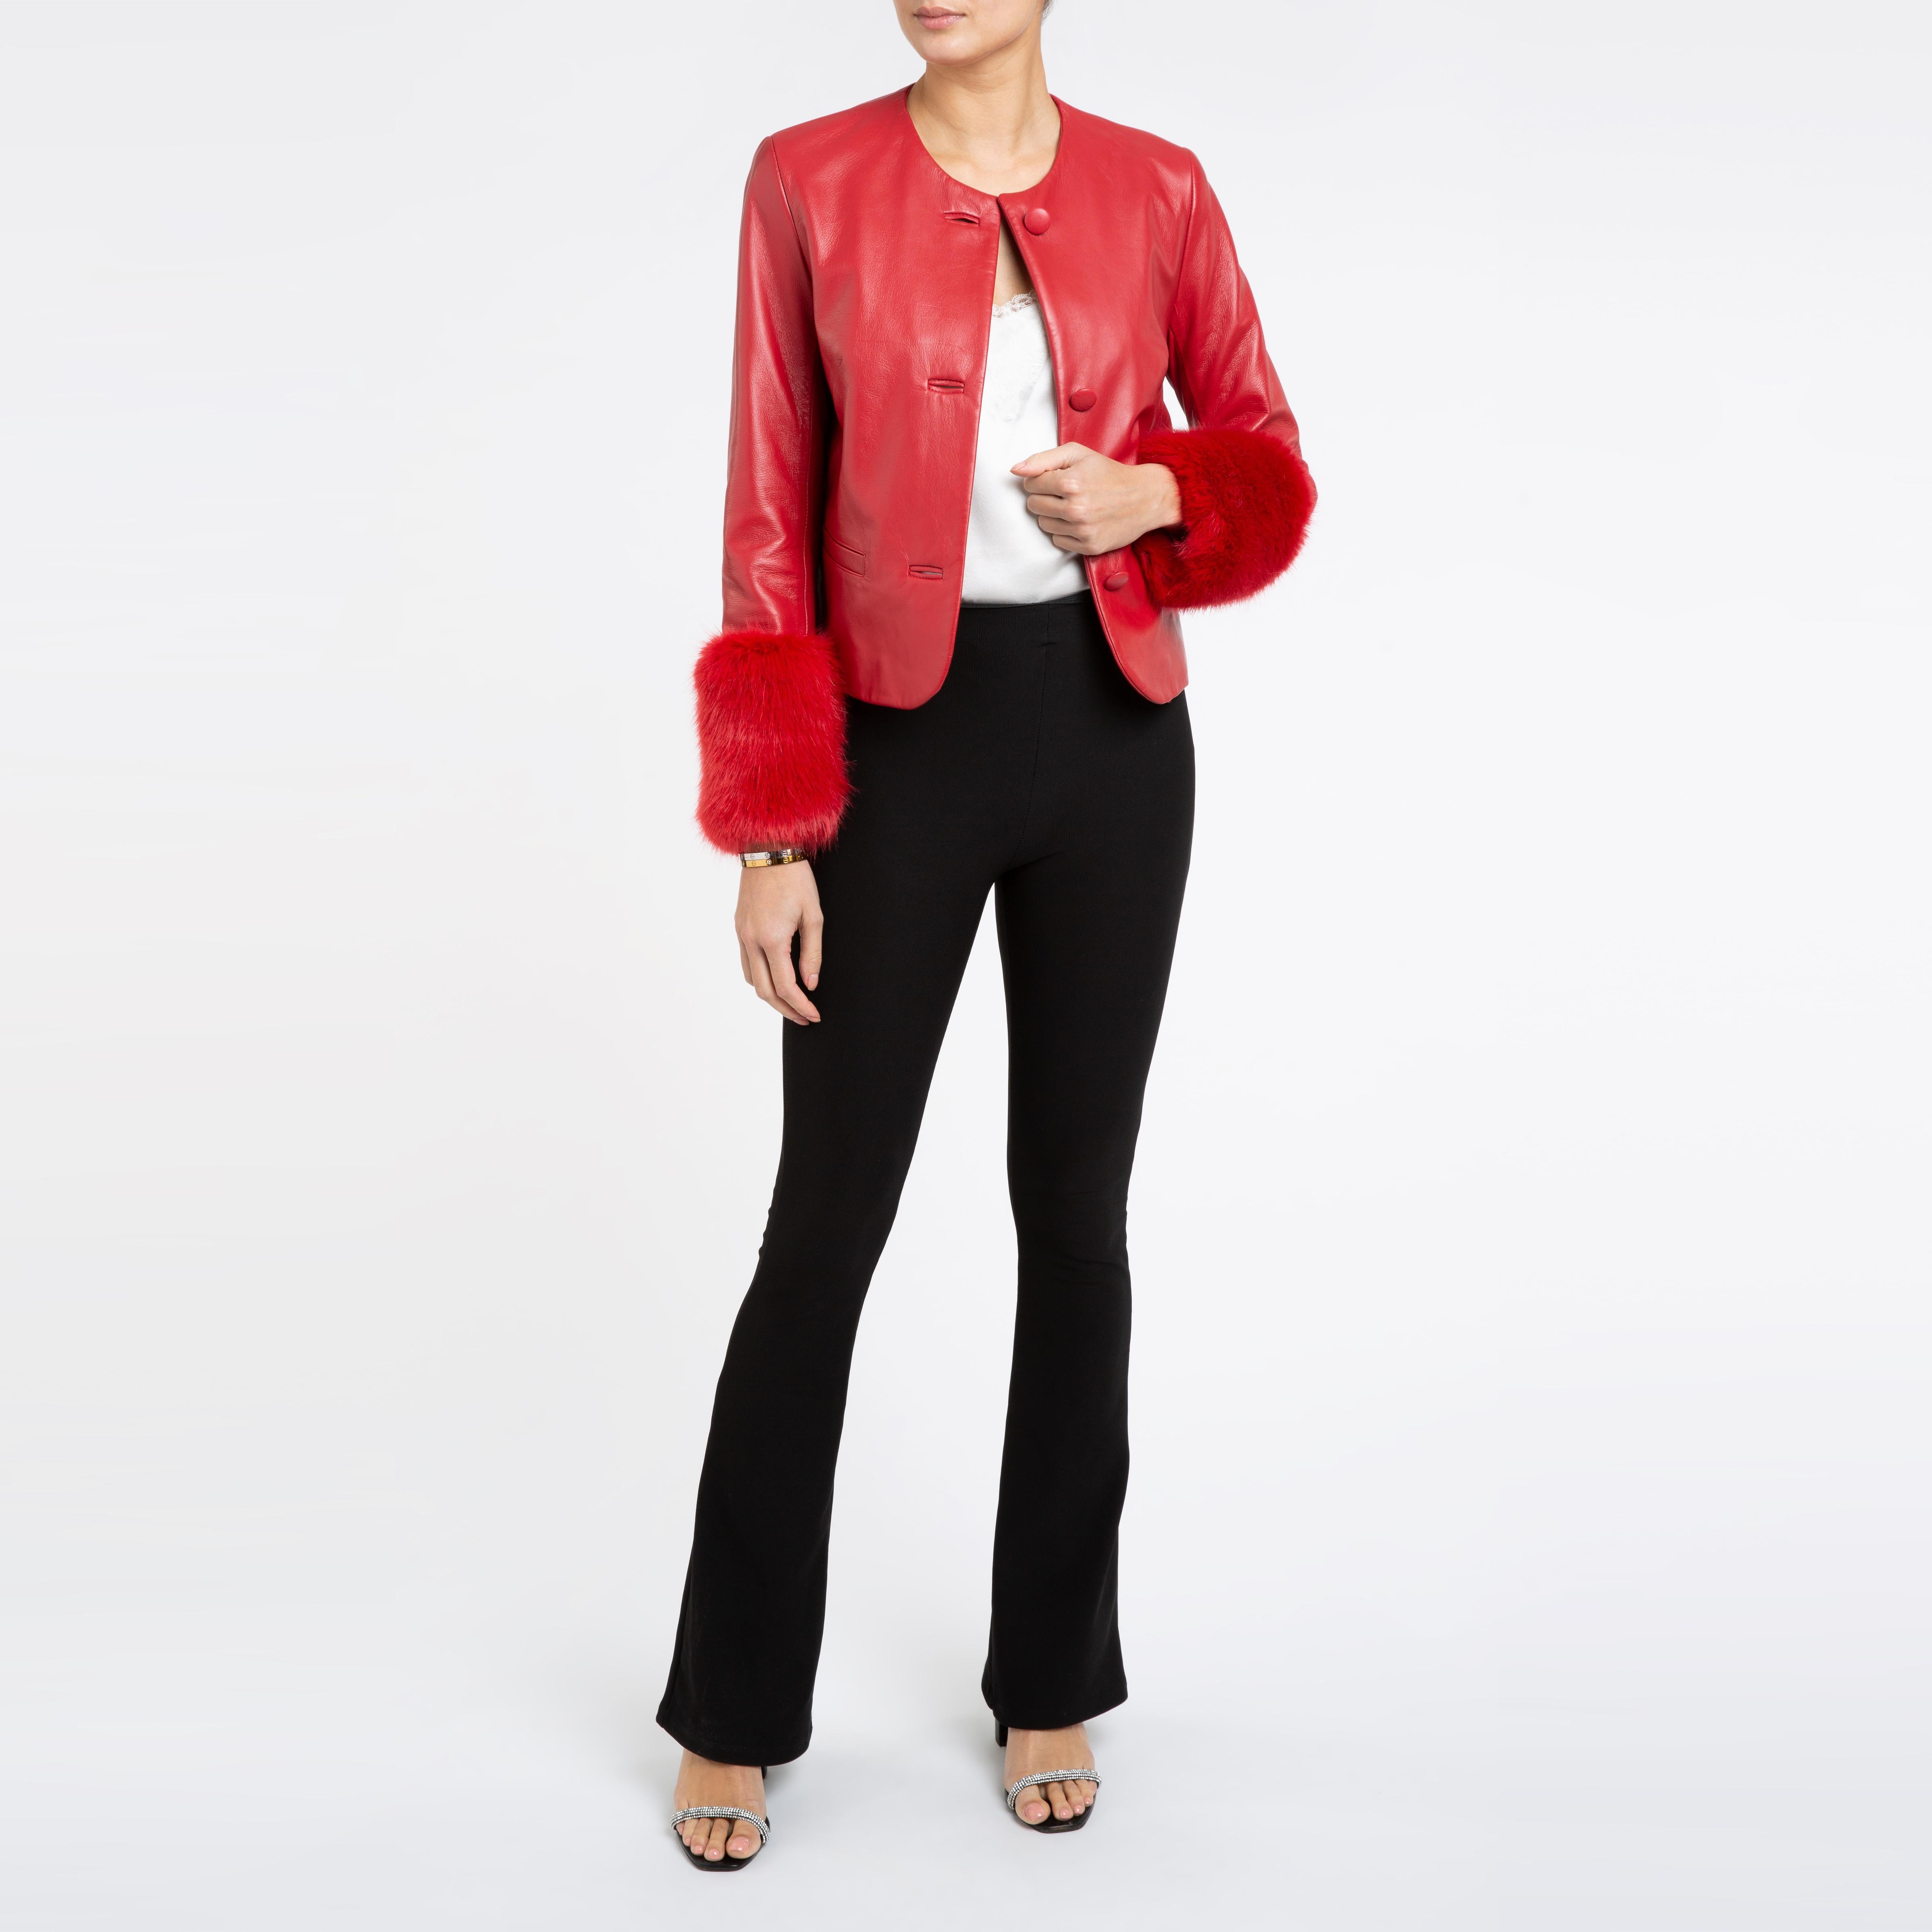 Verheyen Vita Cropped Jacket in Red Leather with Faux Fur - Size uk 10 6